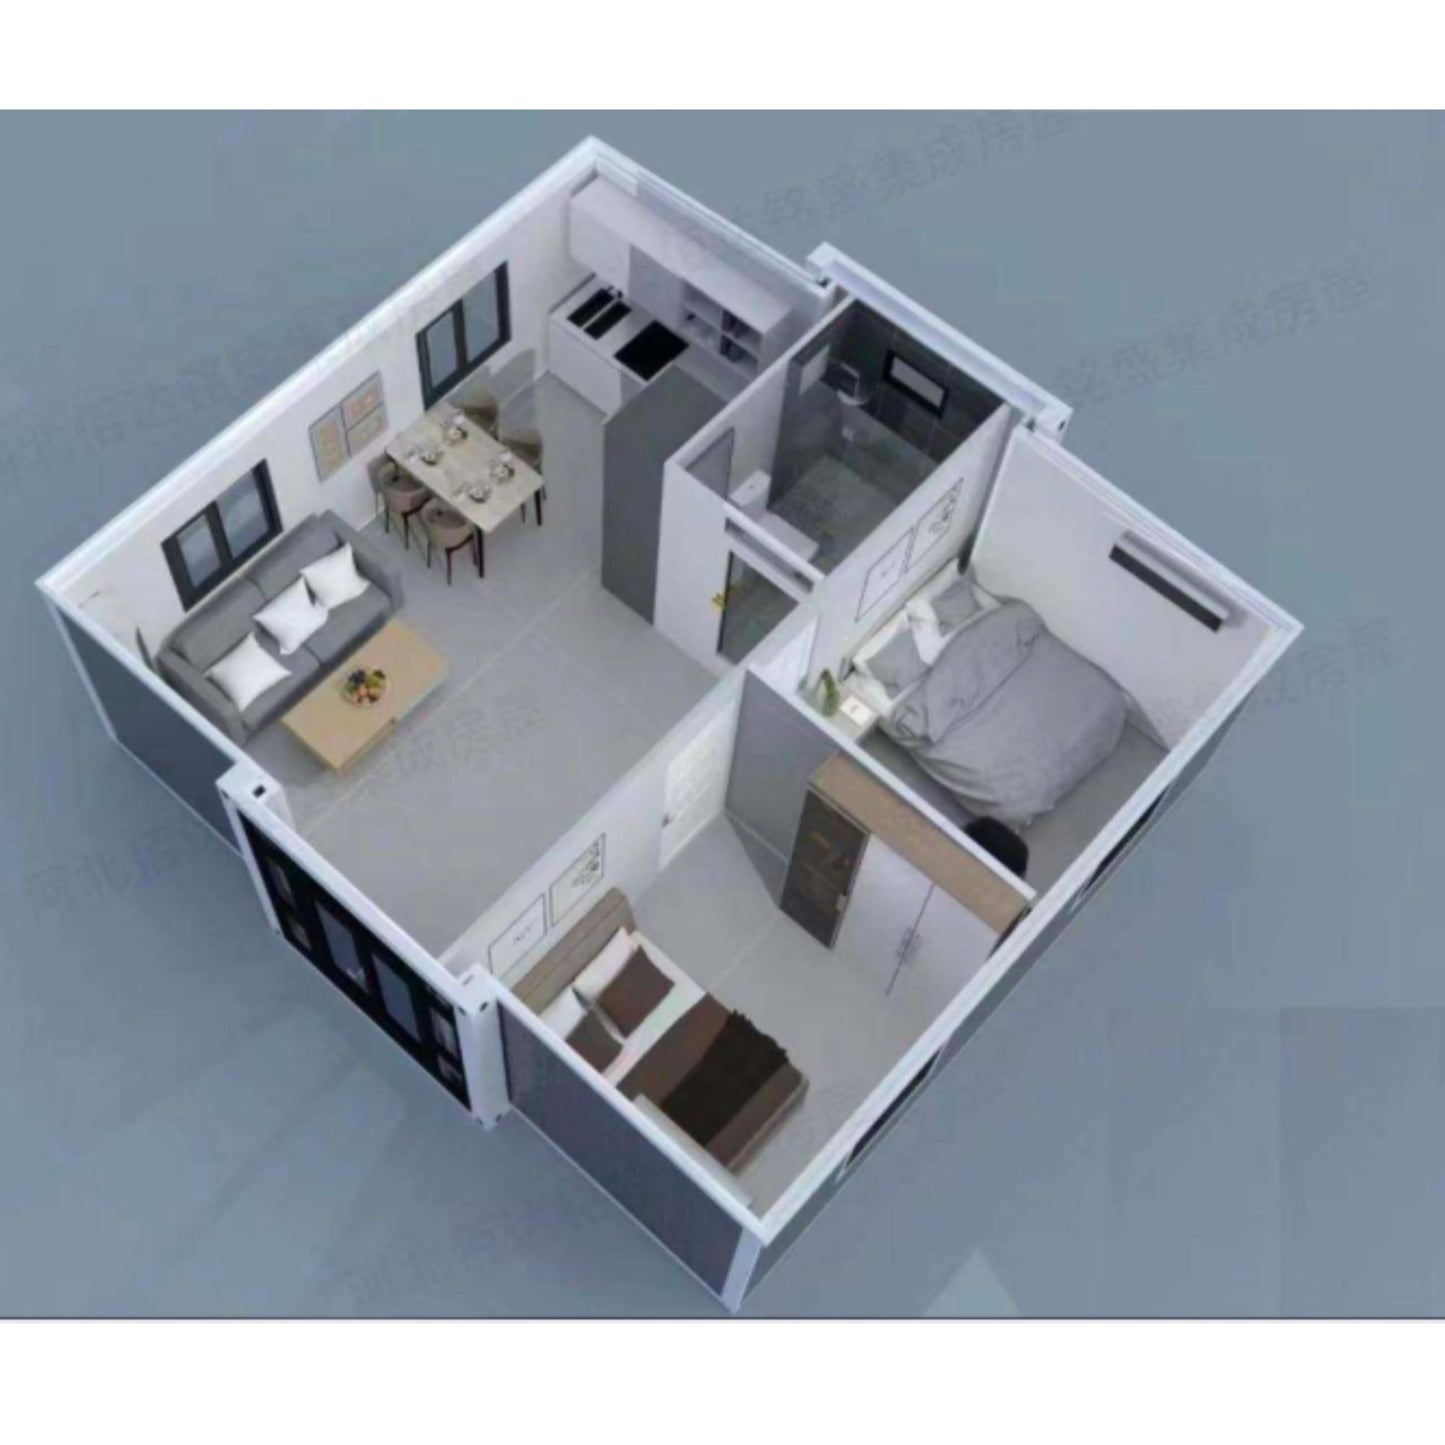 Mobile House, Mobile Home, Portable House, Prefab Expandable House 19ft x 20ft -Perfect for On-The-Go Living! [Your Homies]